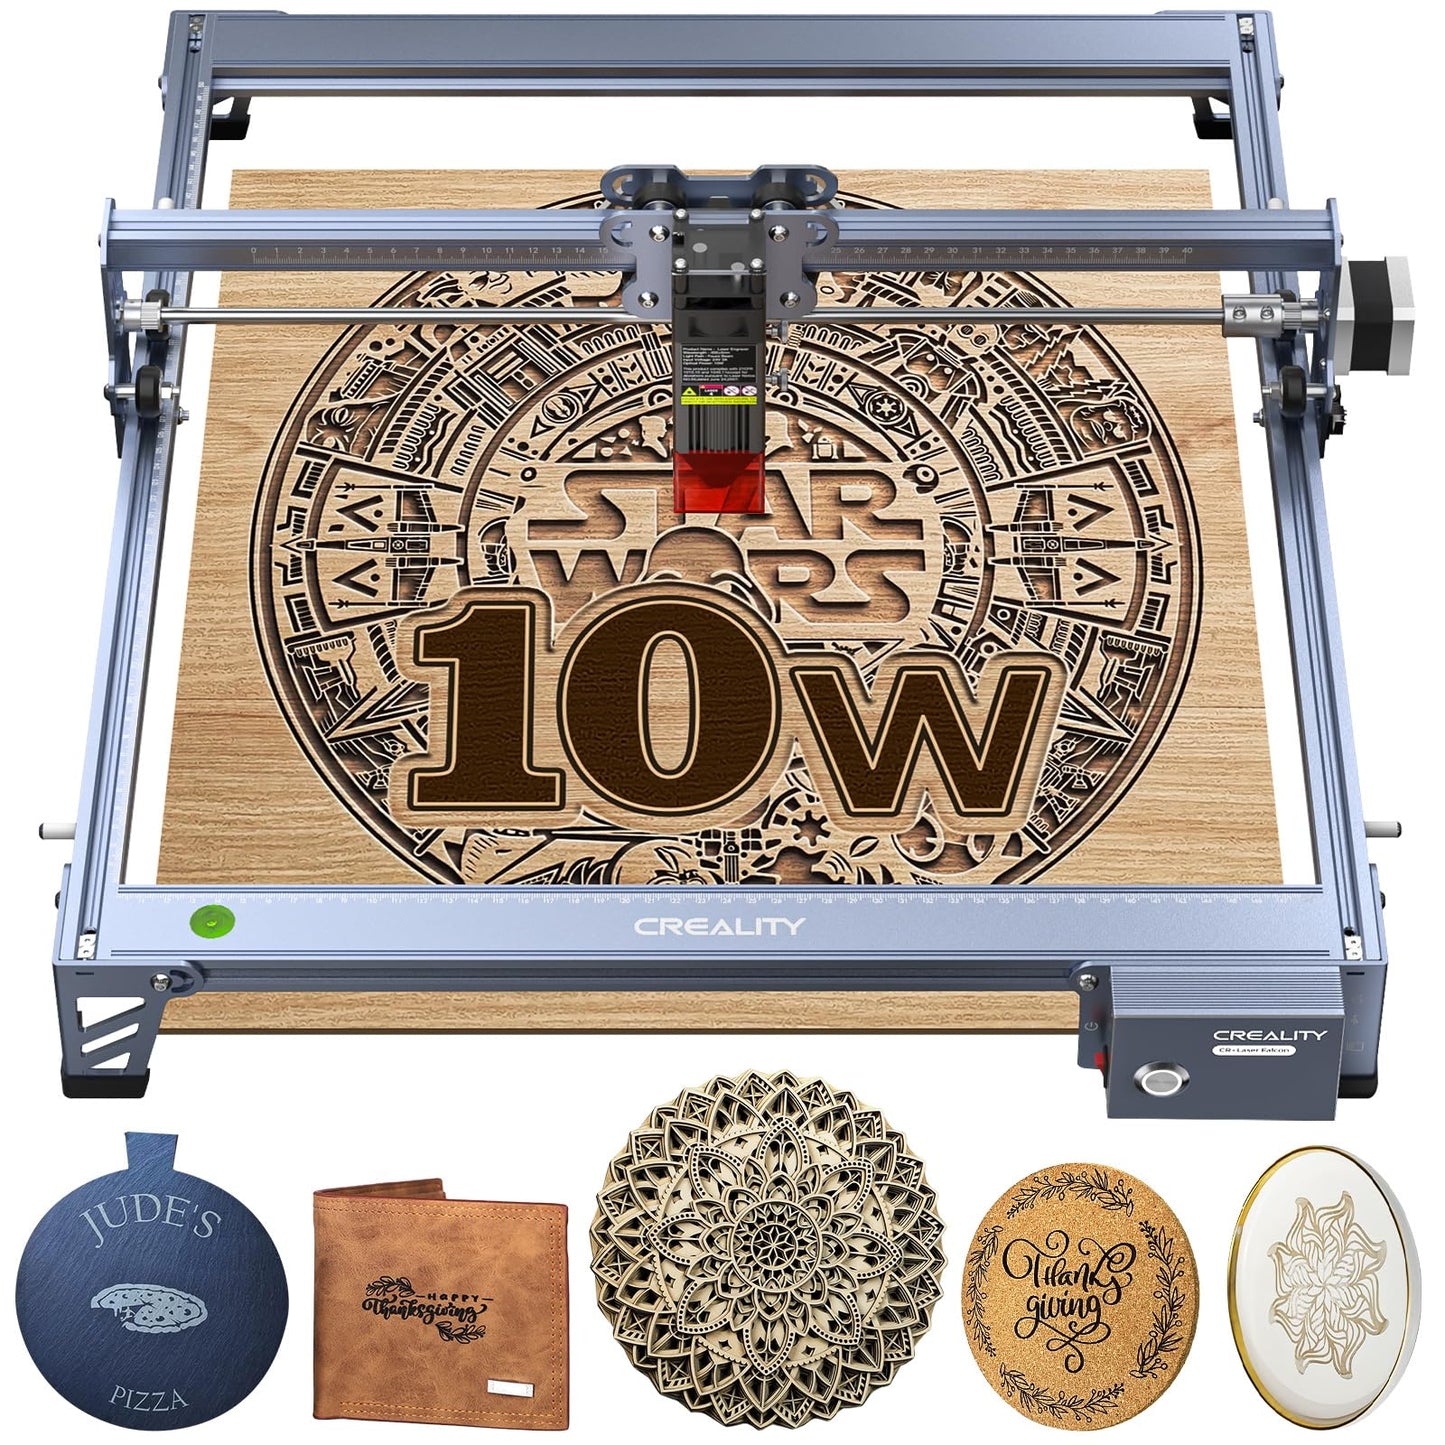 Creality Laser Engraver Machine 10W Output Power, 72W DIY Laser Engraving Machine 0.06mm High Precision Laser Cutter and Engraver for Wood and Metal,